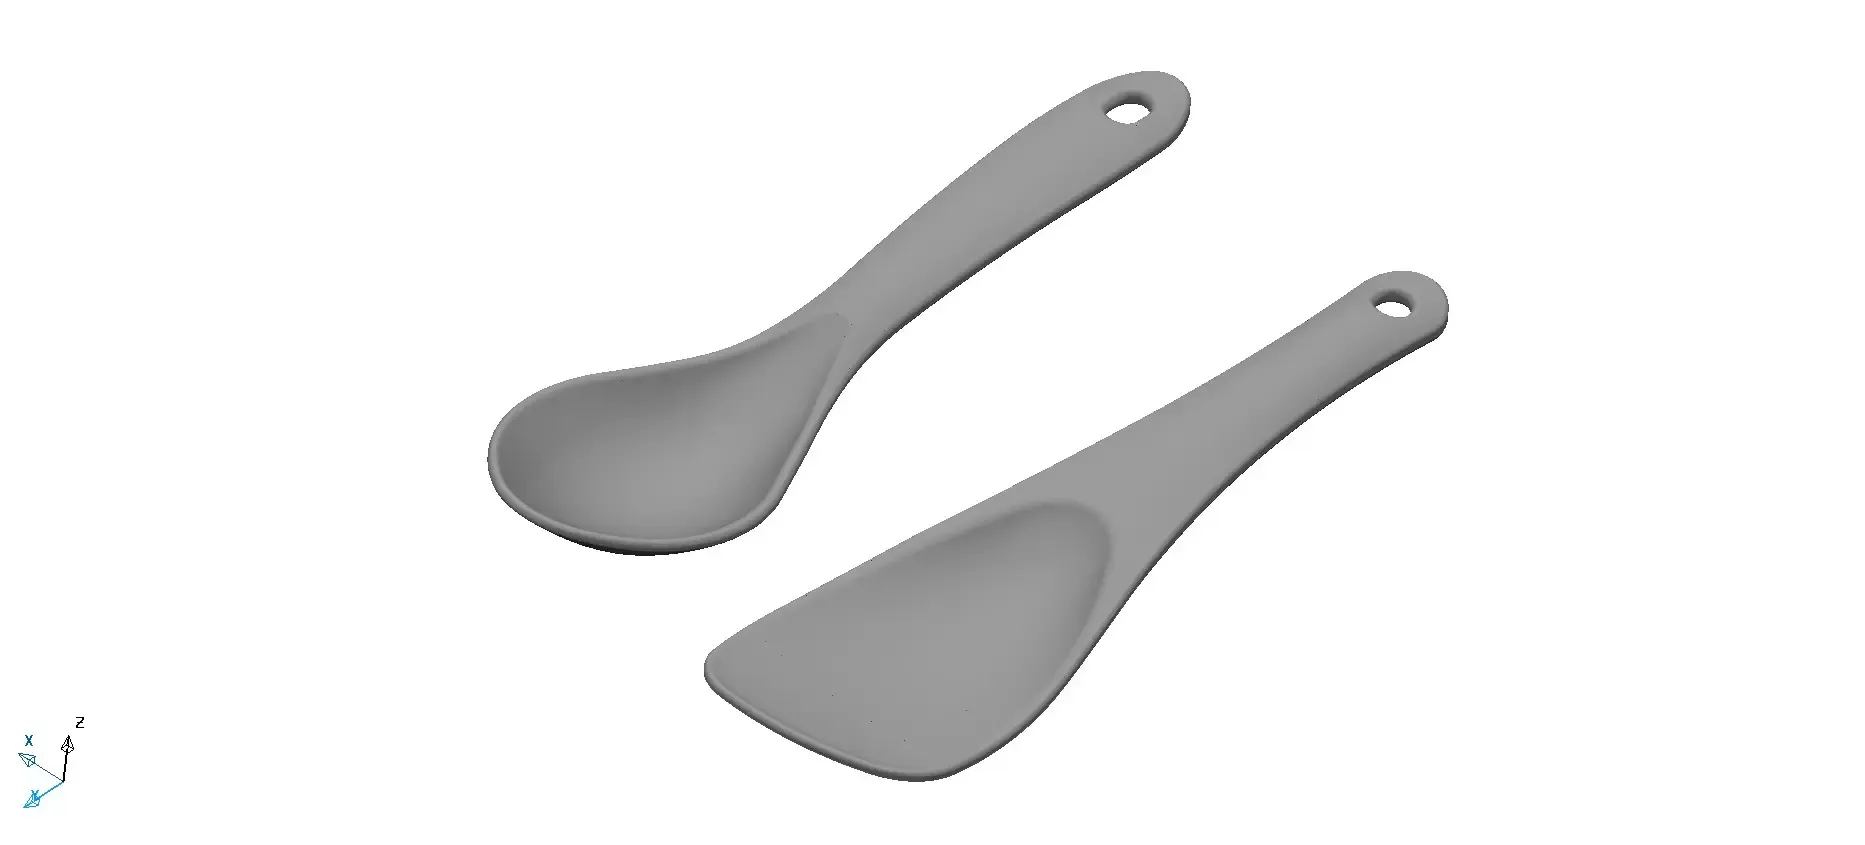 Big spoons for Curry & Rice